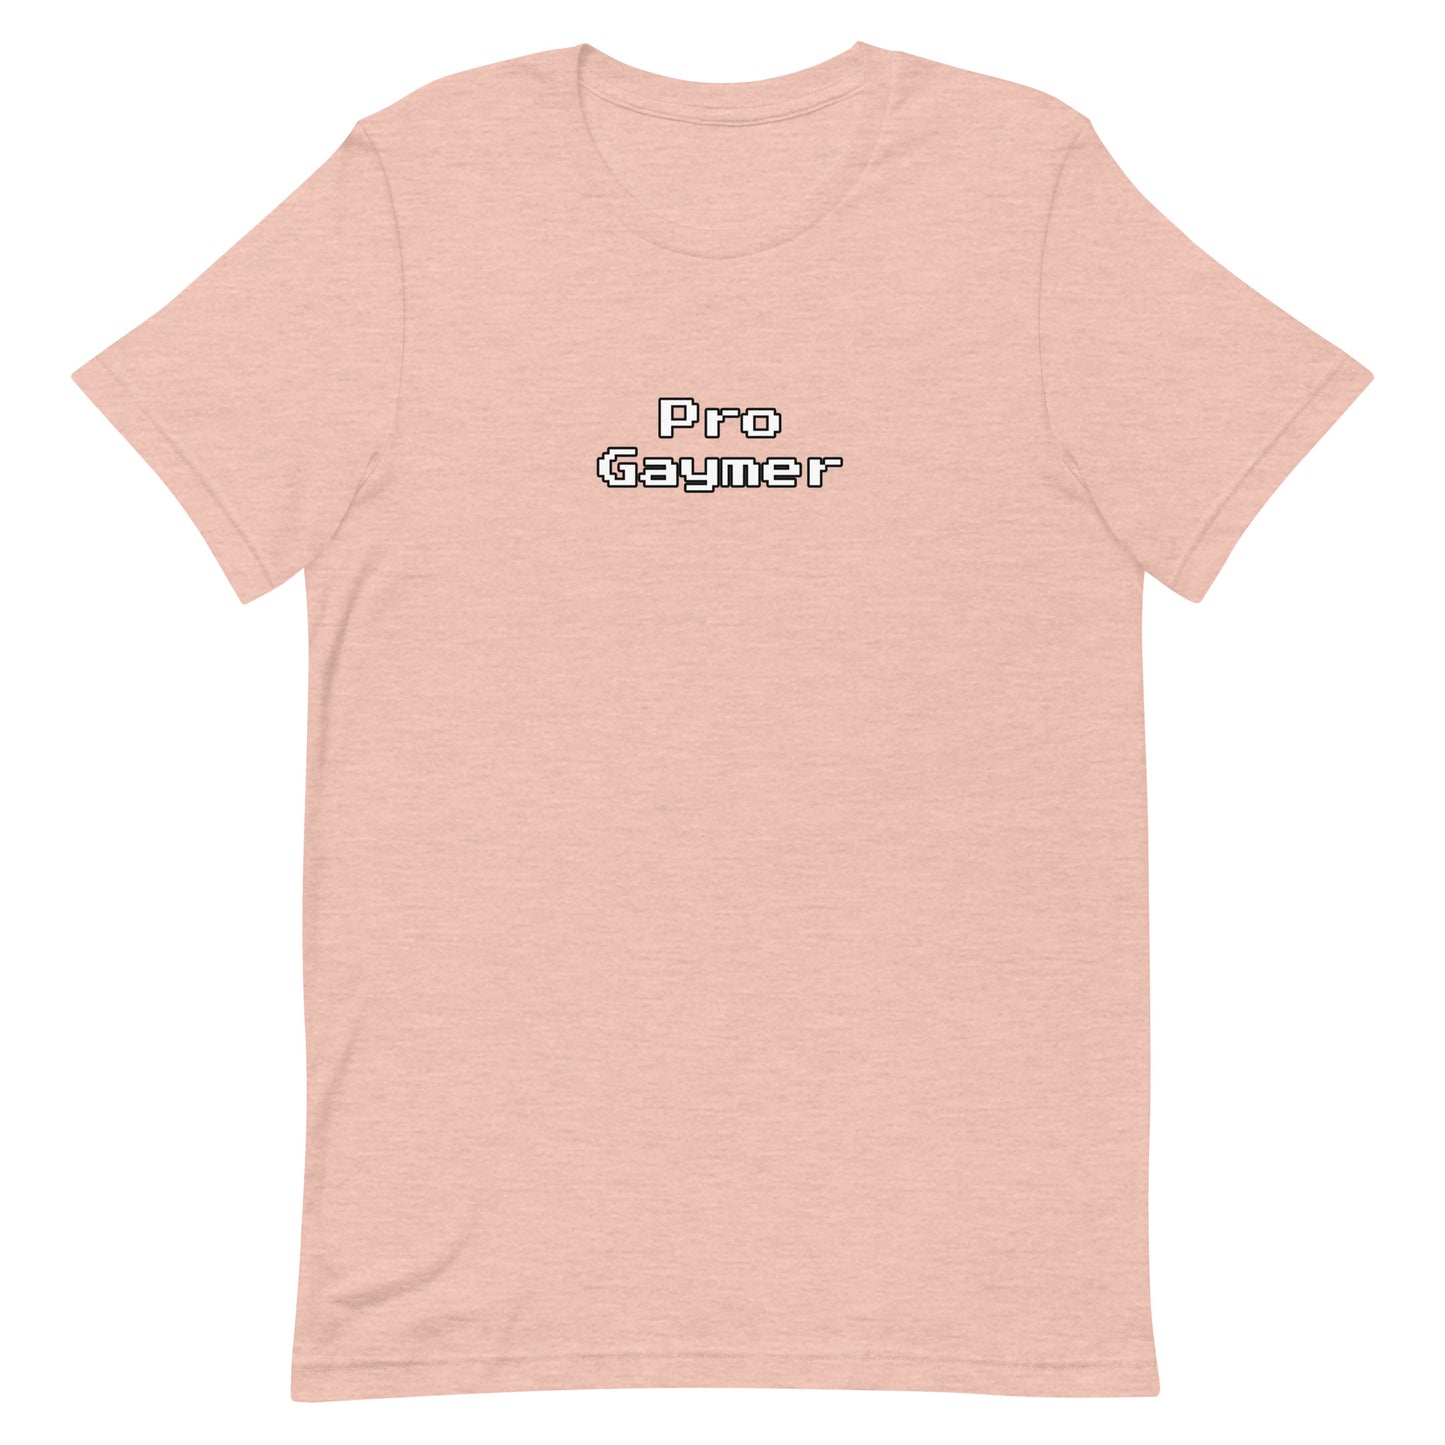 Pro Gaymer - T-Shirt (W) - Heathered, color blends